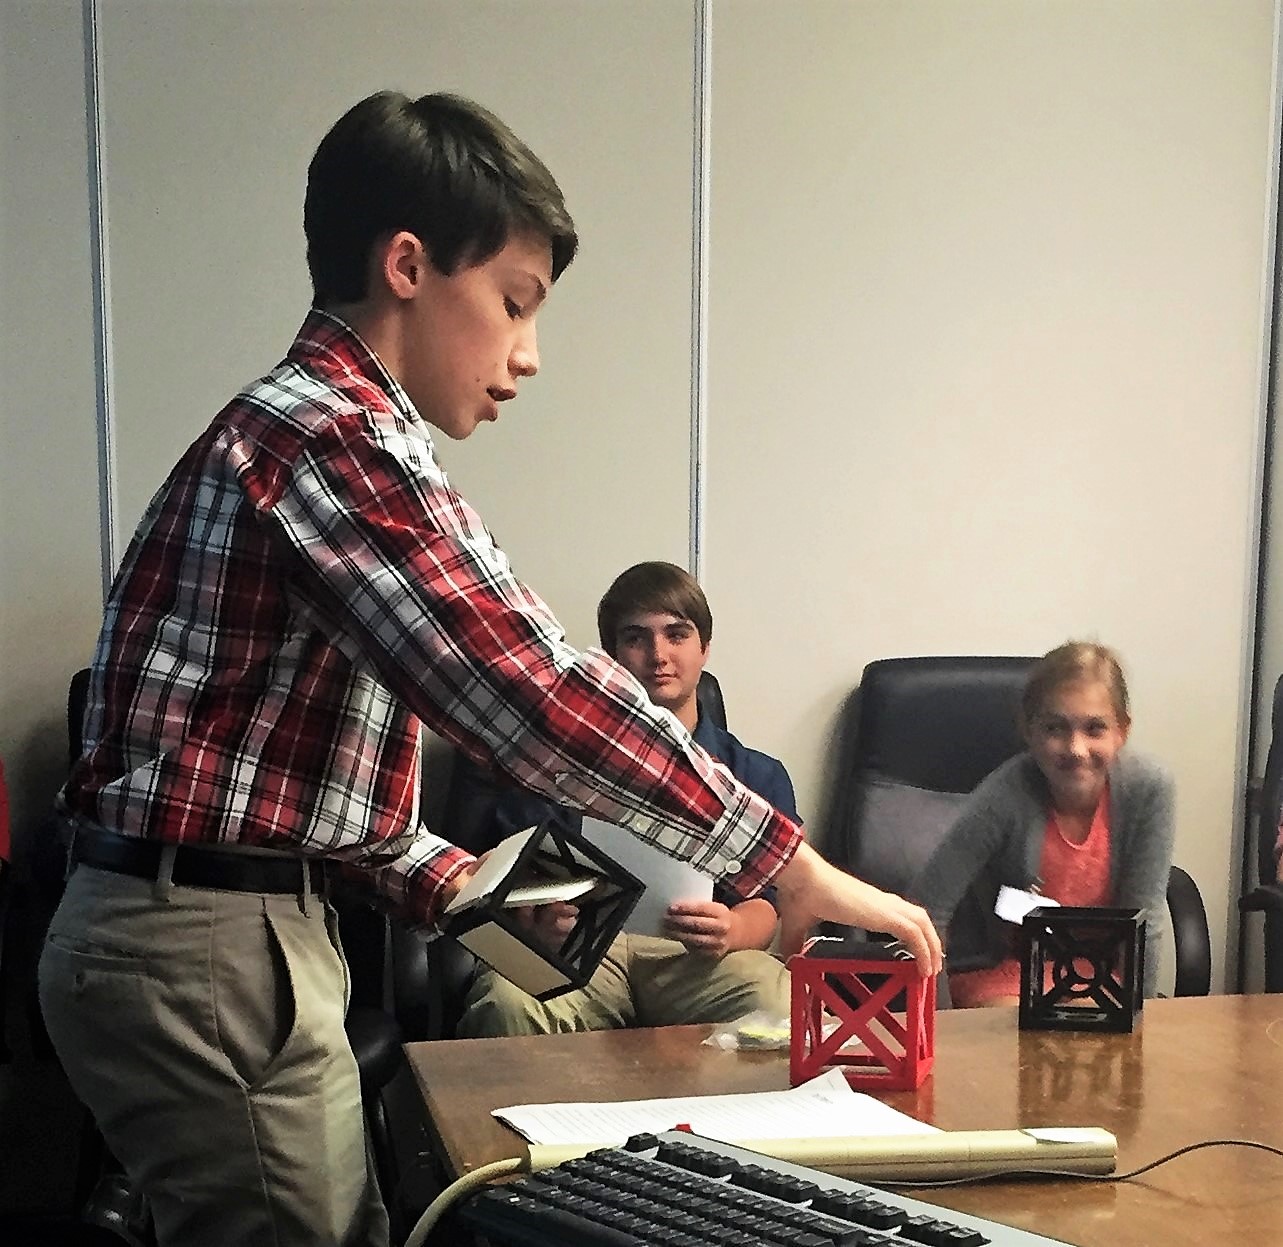 Students at Robertsville Middle School in Oak Ridge, Tennessee, design a 1U CubeSat as part of an elective course.